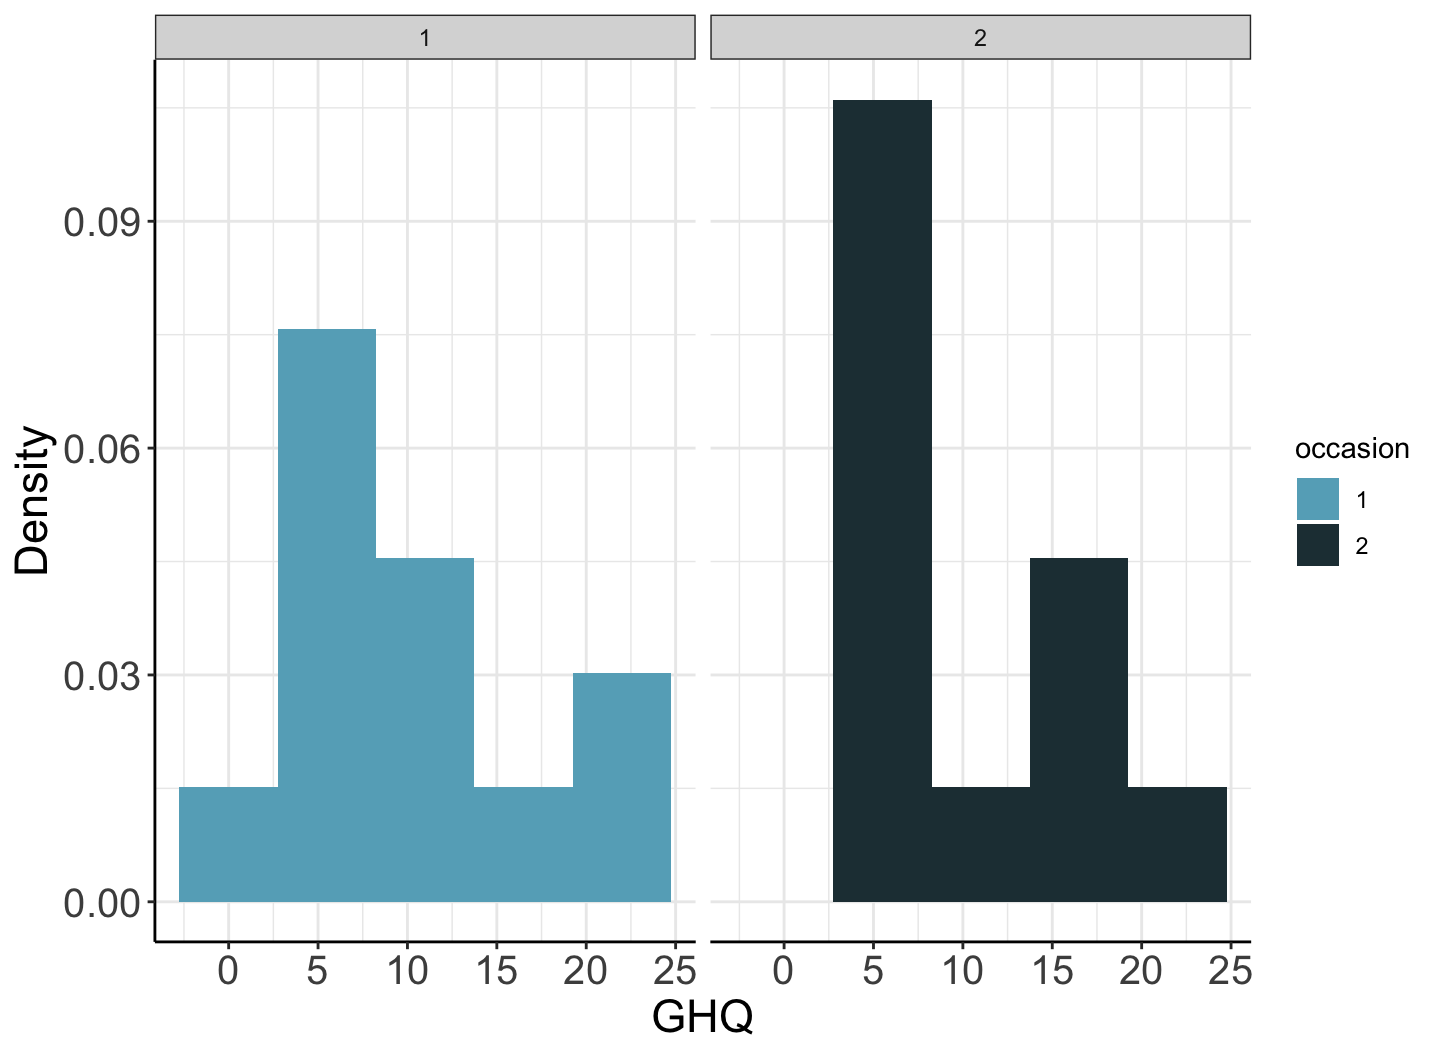 Histogram of GHQ by occasion